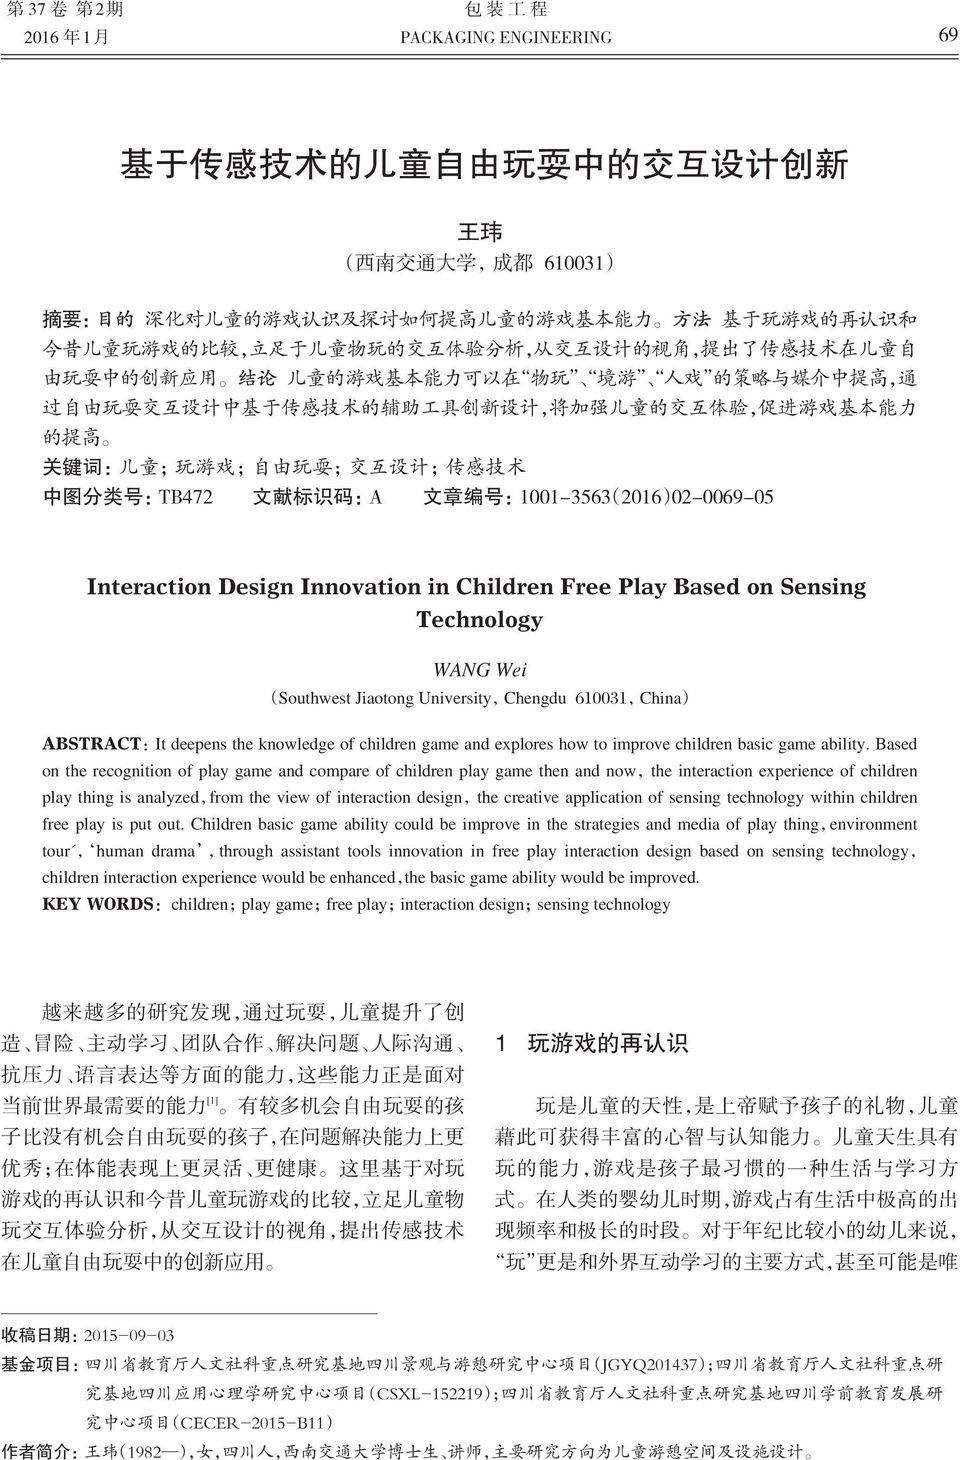 Innovation in Children Free Play Based on Sensing Technology WANG Wei Southwest Jiaotong University Chengdu 610031 China ABSTRACT It deepens the knowledge of children game and explores how to improve